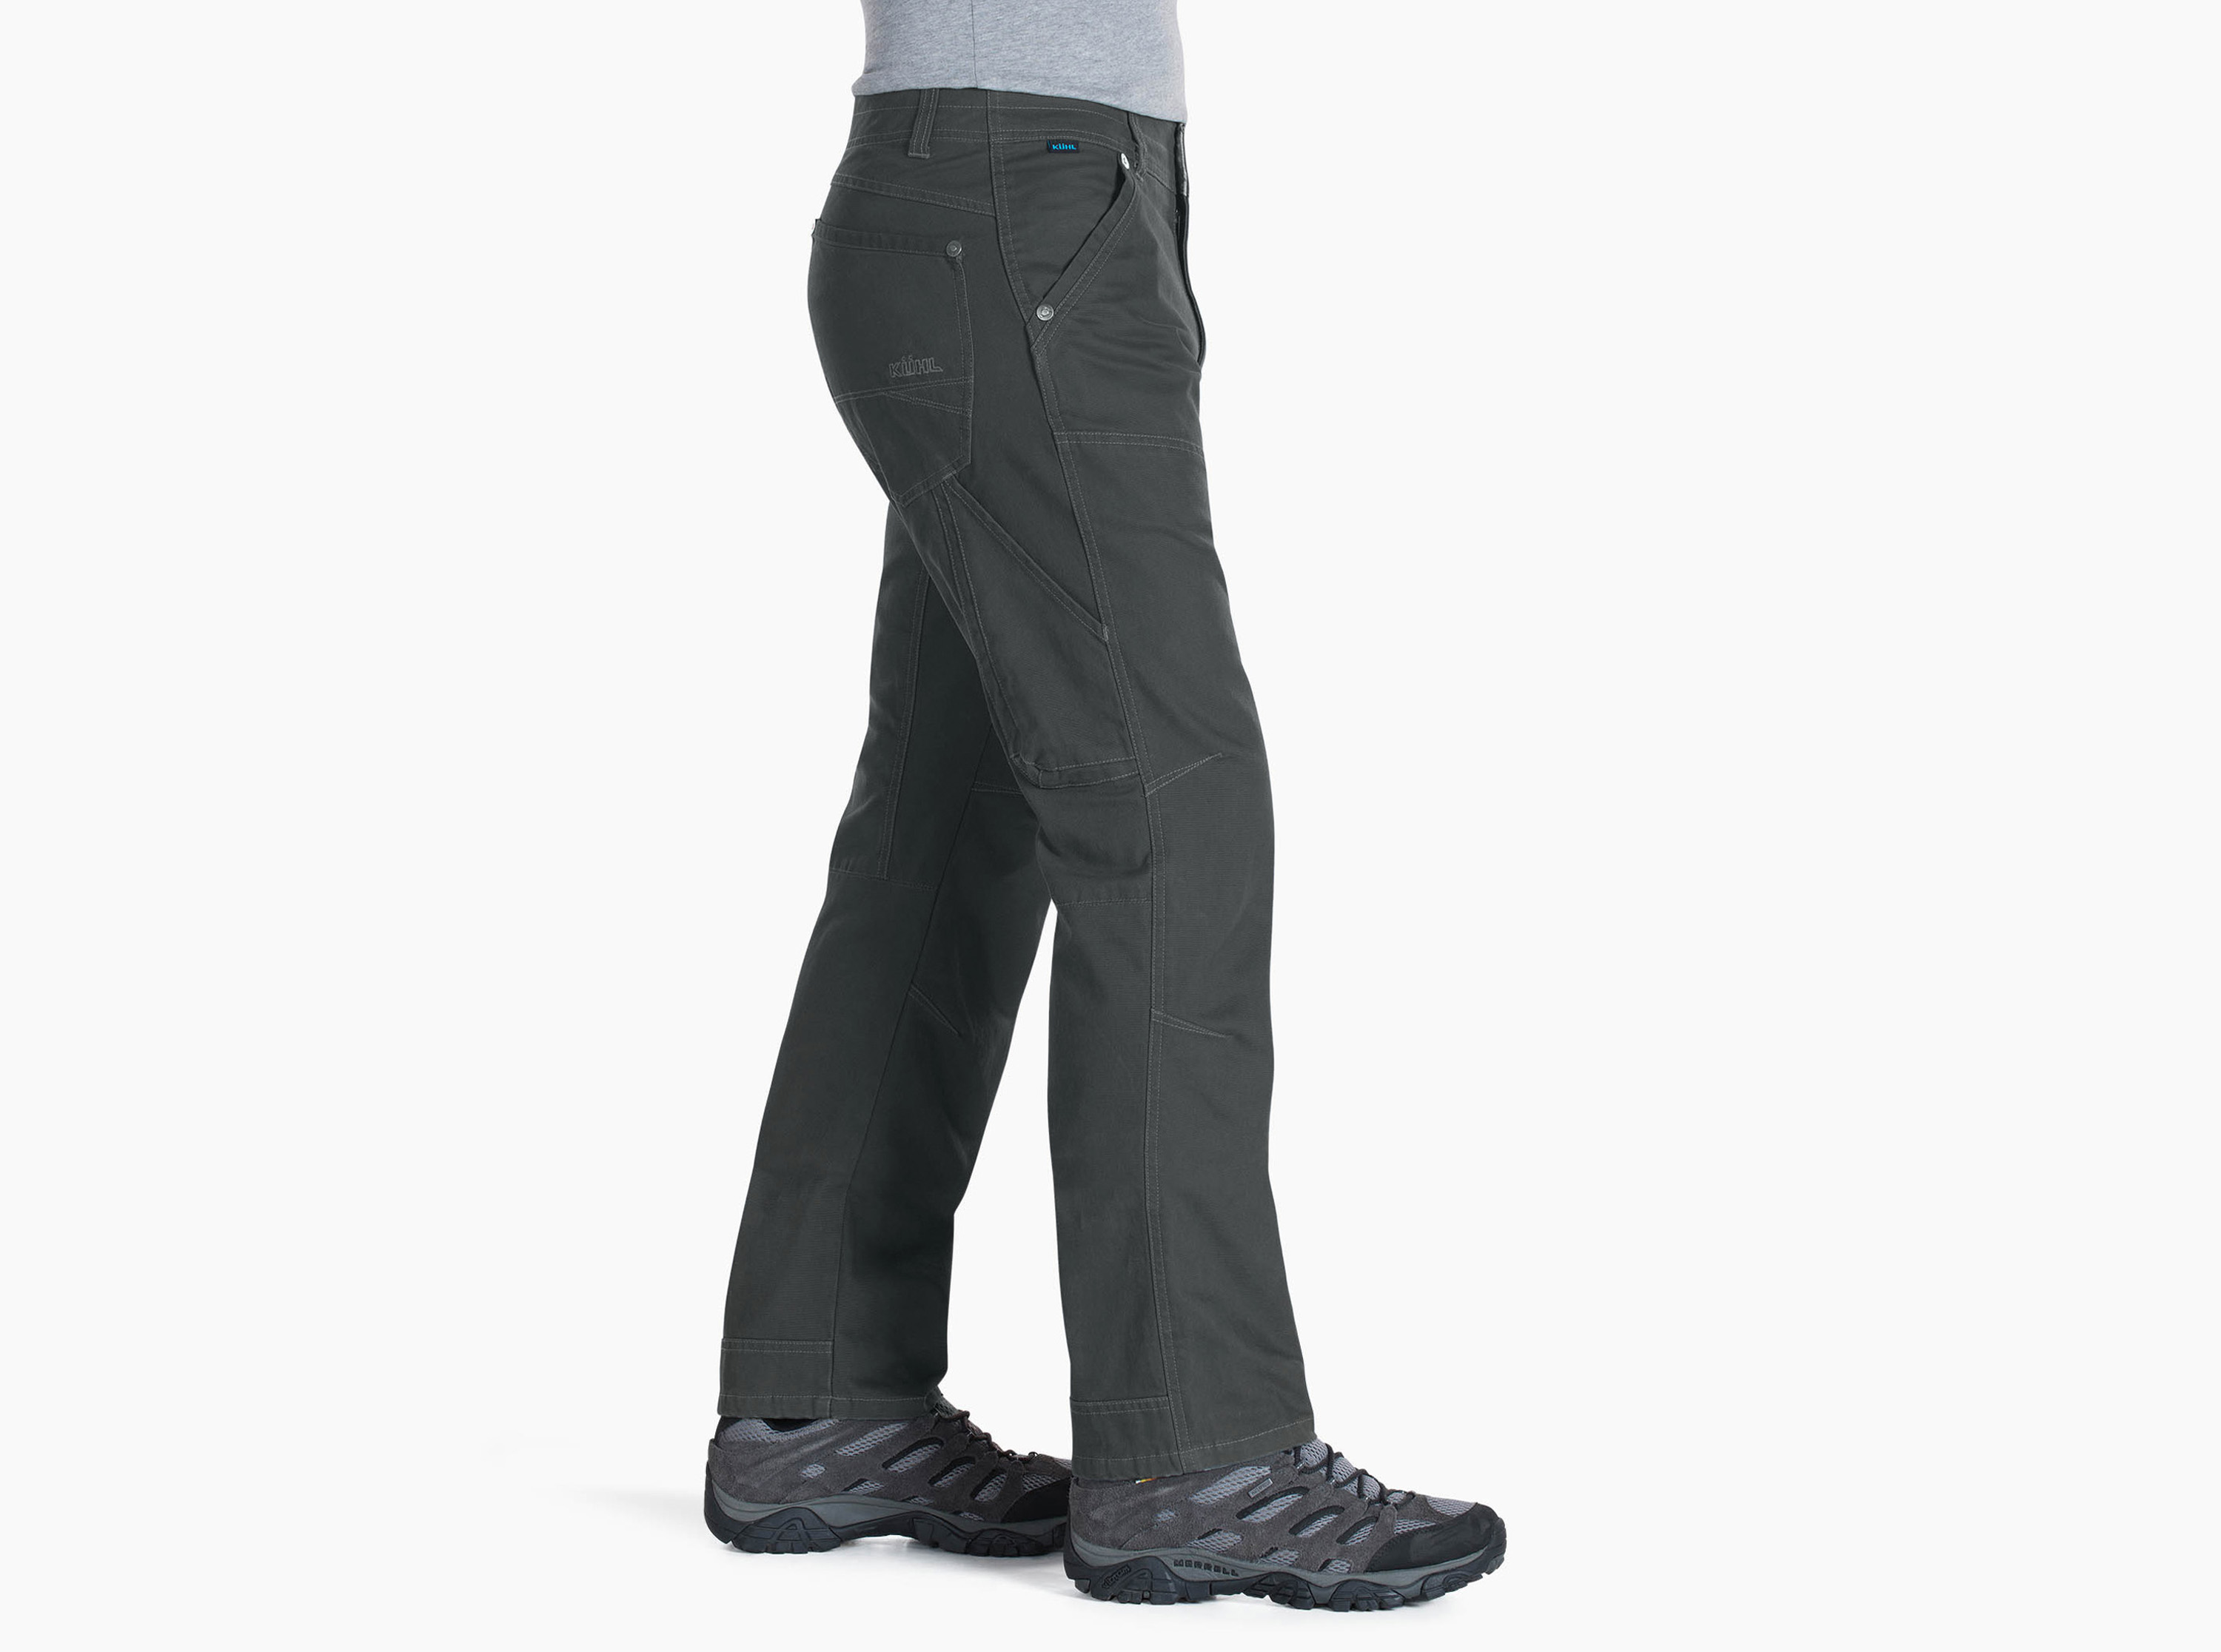 KUHL Men's Rydr Pant 32 Inseam Mens Trousers Combed Cotton Hiking Cargo